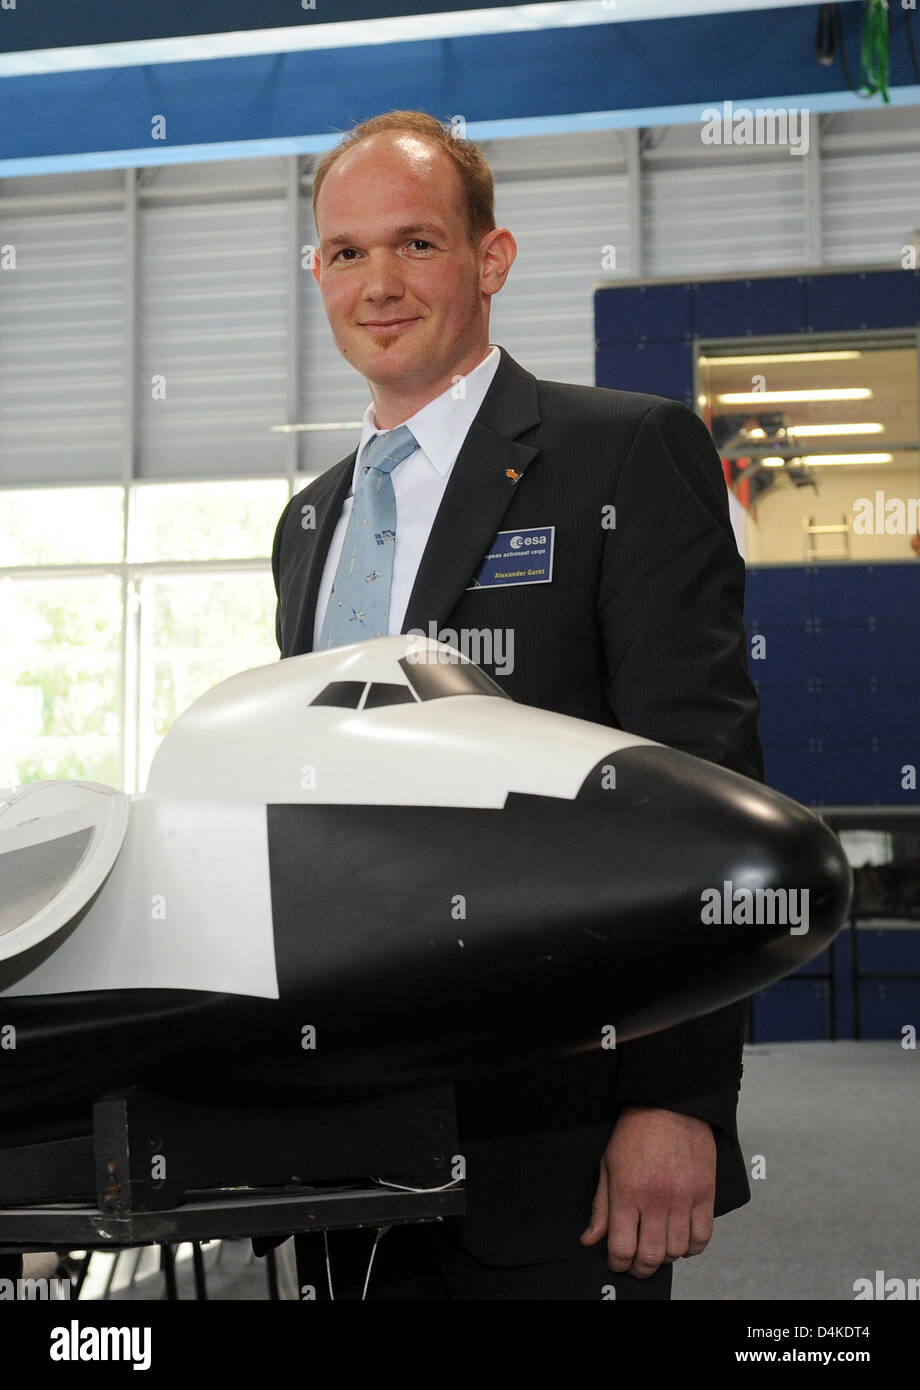 German geophysicist Alexander Gerst smiles during his presentation as the new astronaut candidate of European Space Agency (ESA) in Cologne, Germany, 09 July 2009. The 33-year-old will start his astronaut training on 01 September. Photo: JOERG  CARSTENSEN Stock Photo